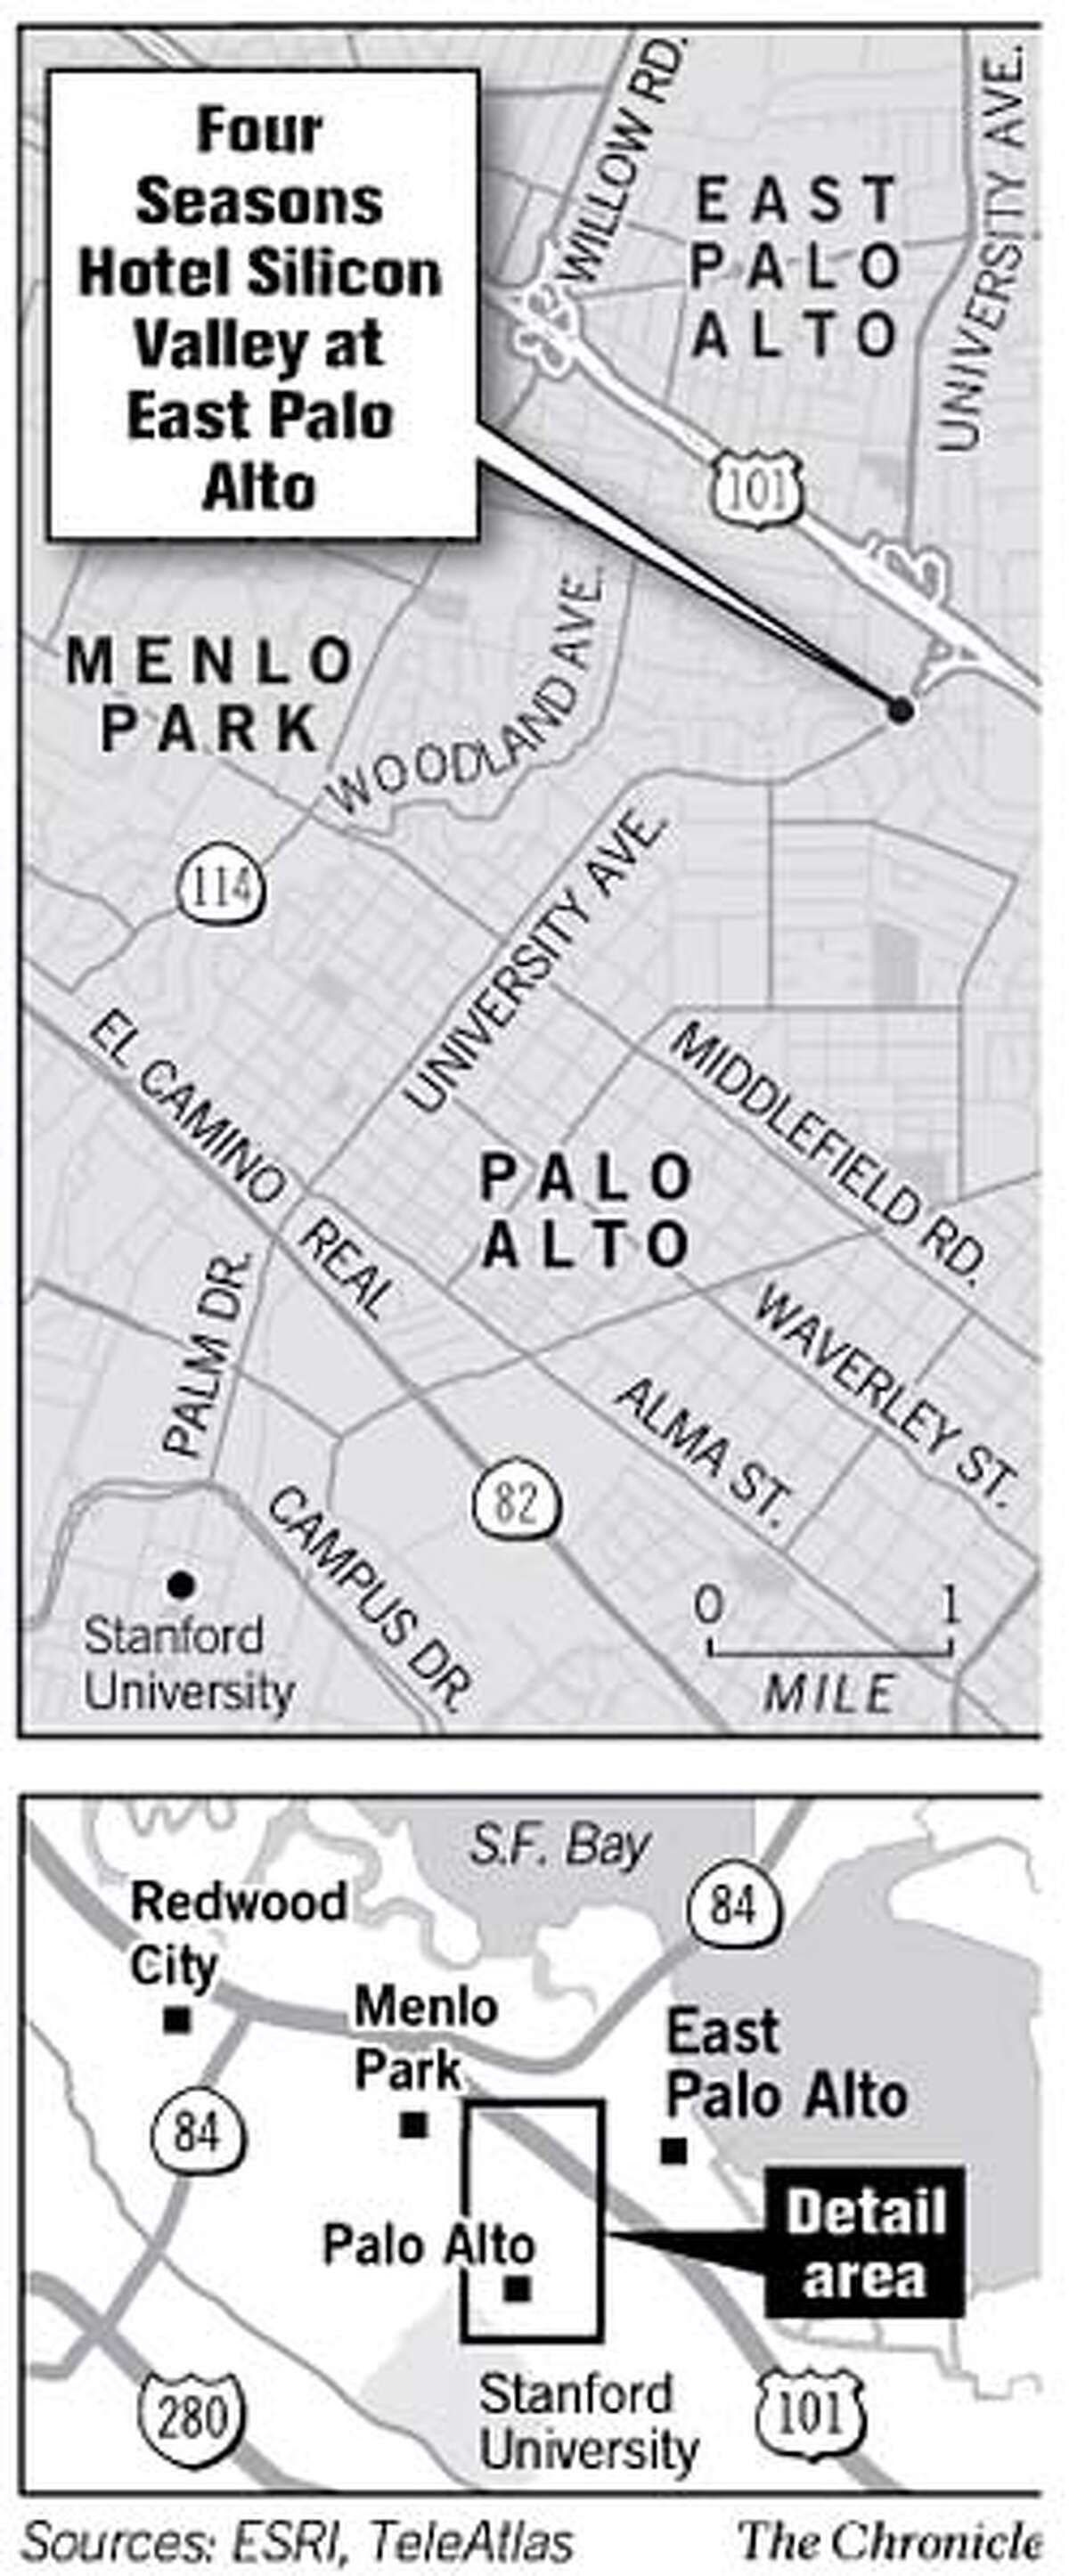 Four Seasons Hotel Silicon Valley at East Palo Alto. Chronicle Graphic